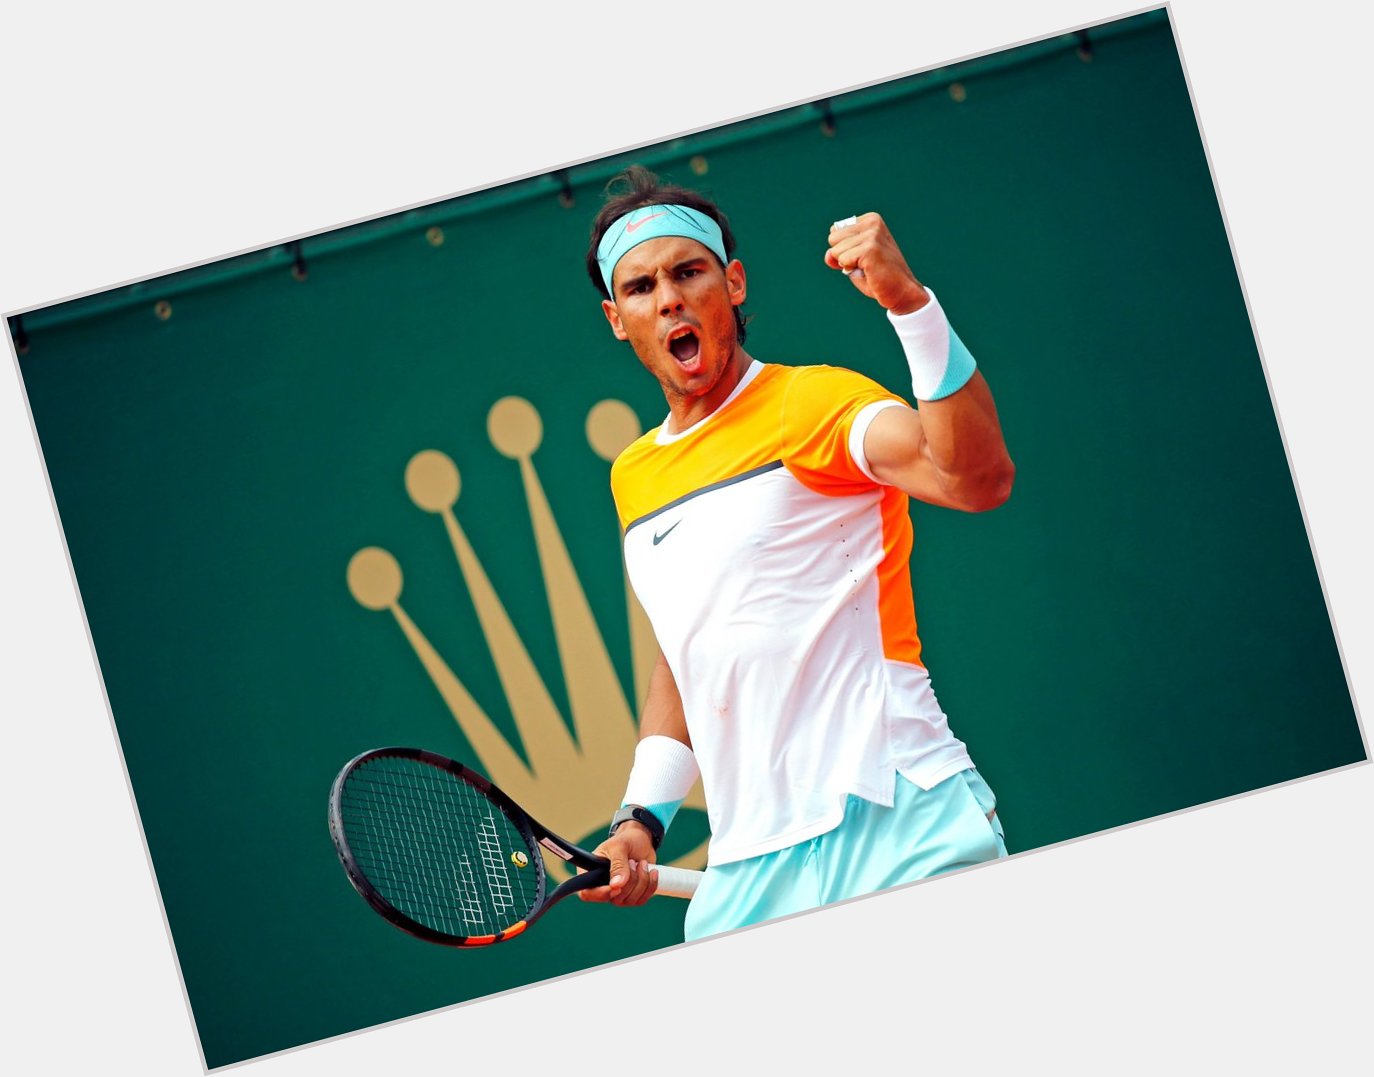 Happy Birthday to the best tennis player in the world, Rafael Nadal! 